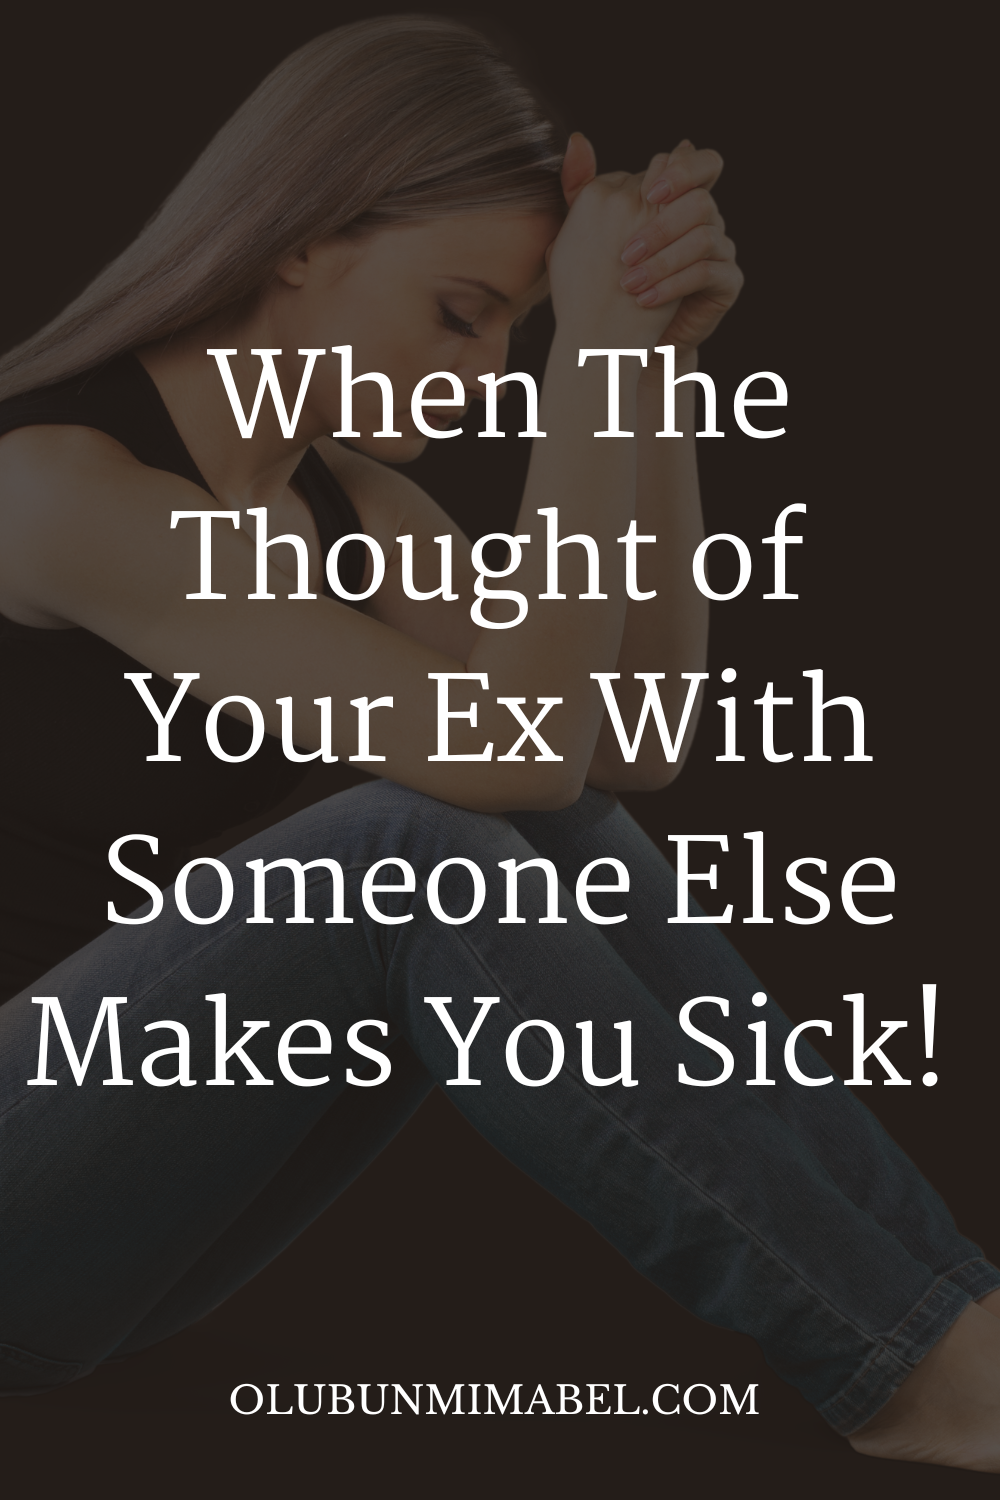 ''The Thought of My Ex With Someone Else Makes Me Sick''